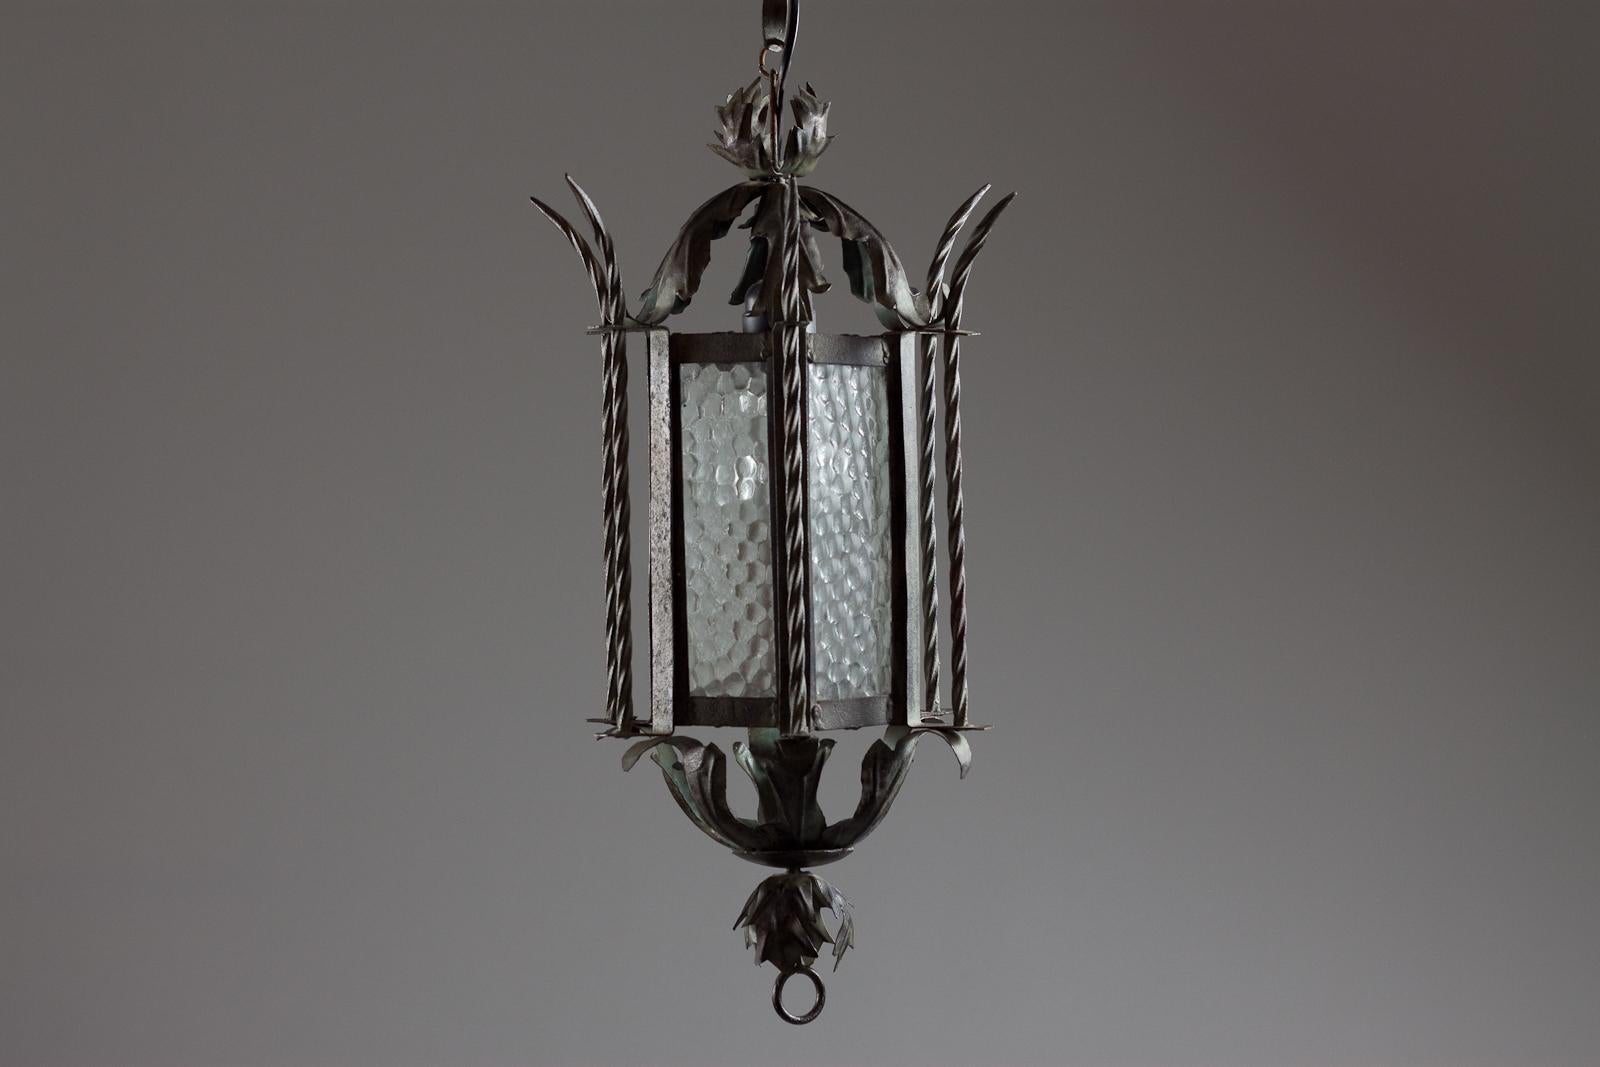 A dashing and big 1920's Finnish lantern pendant with original glass.
Will look astonishing both indoors and outdoors and fits within any modern interior deign.